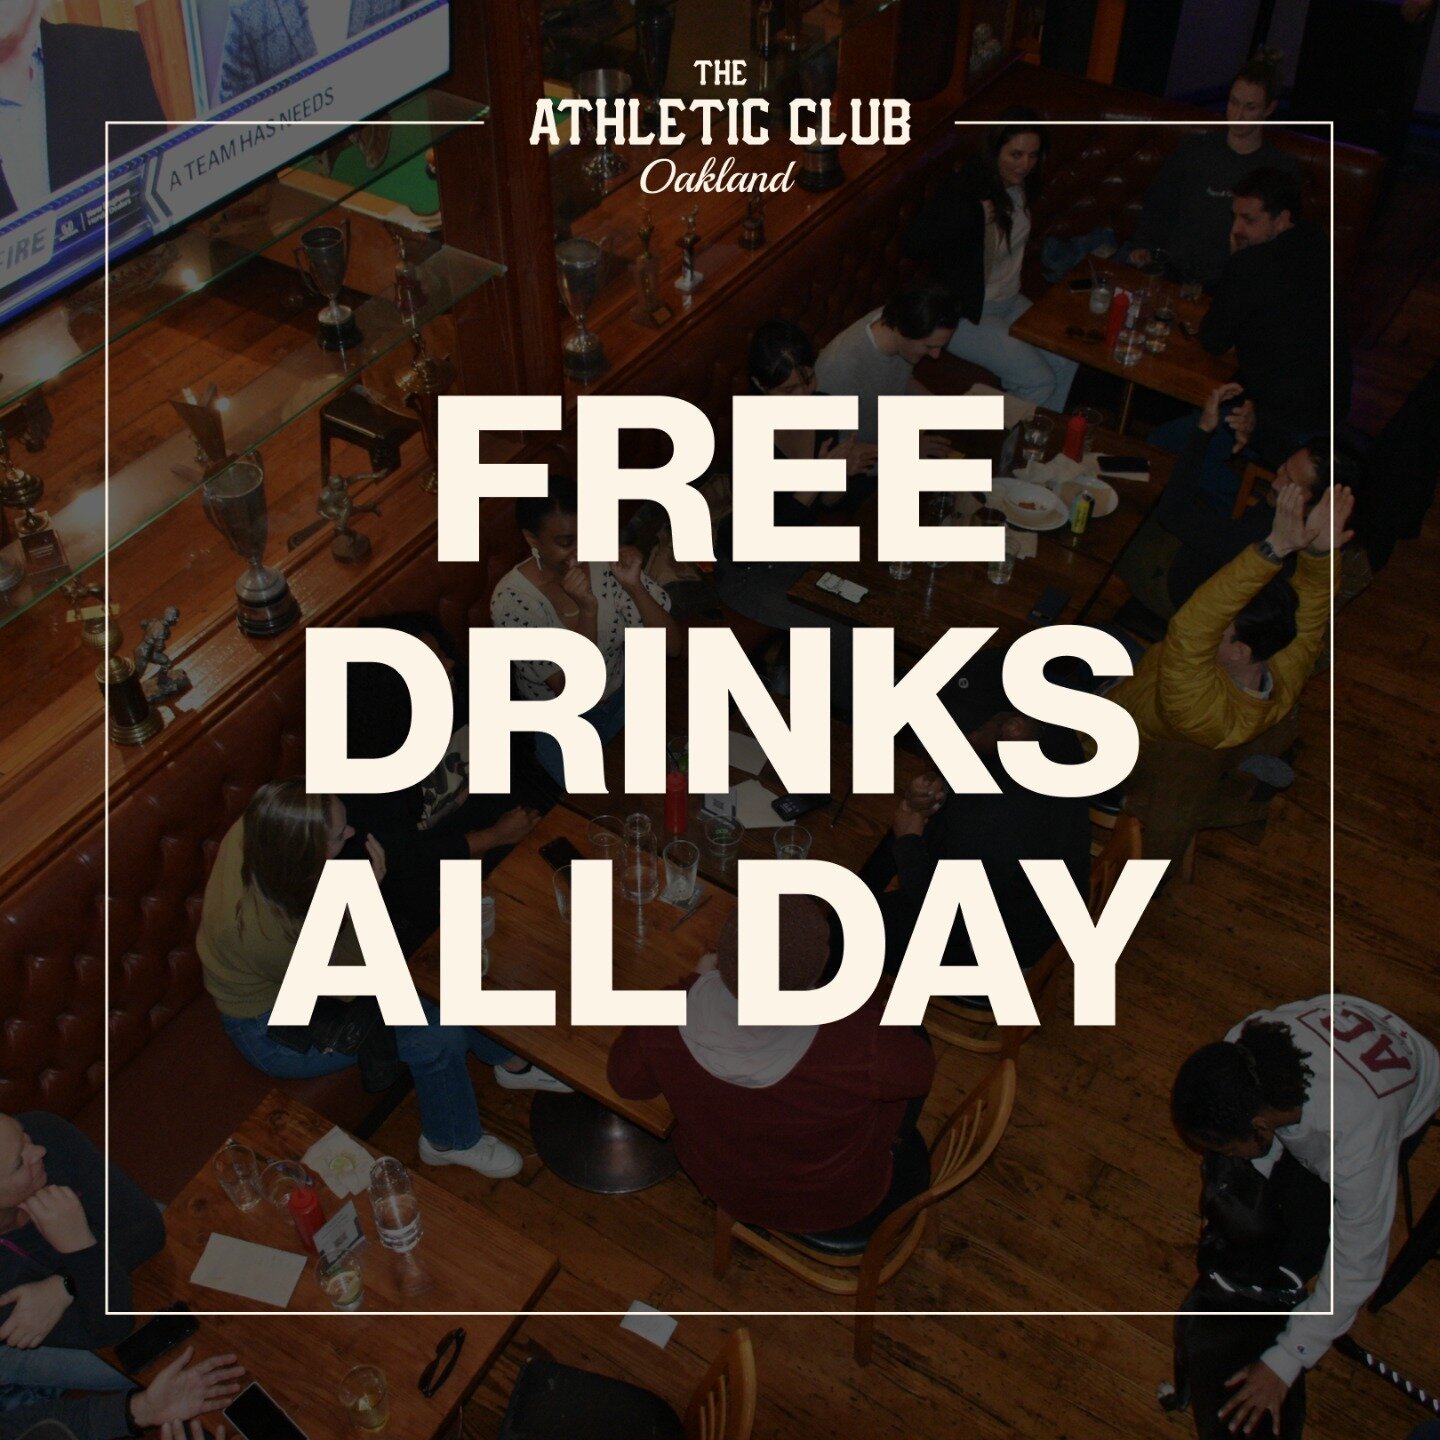 You can say this month is off to a strong start. 😜

#theathleticcluboakland #athleticcluboakland #theacoakland